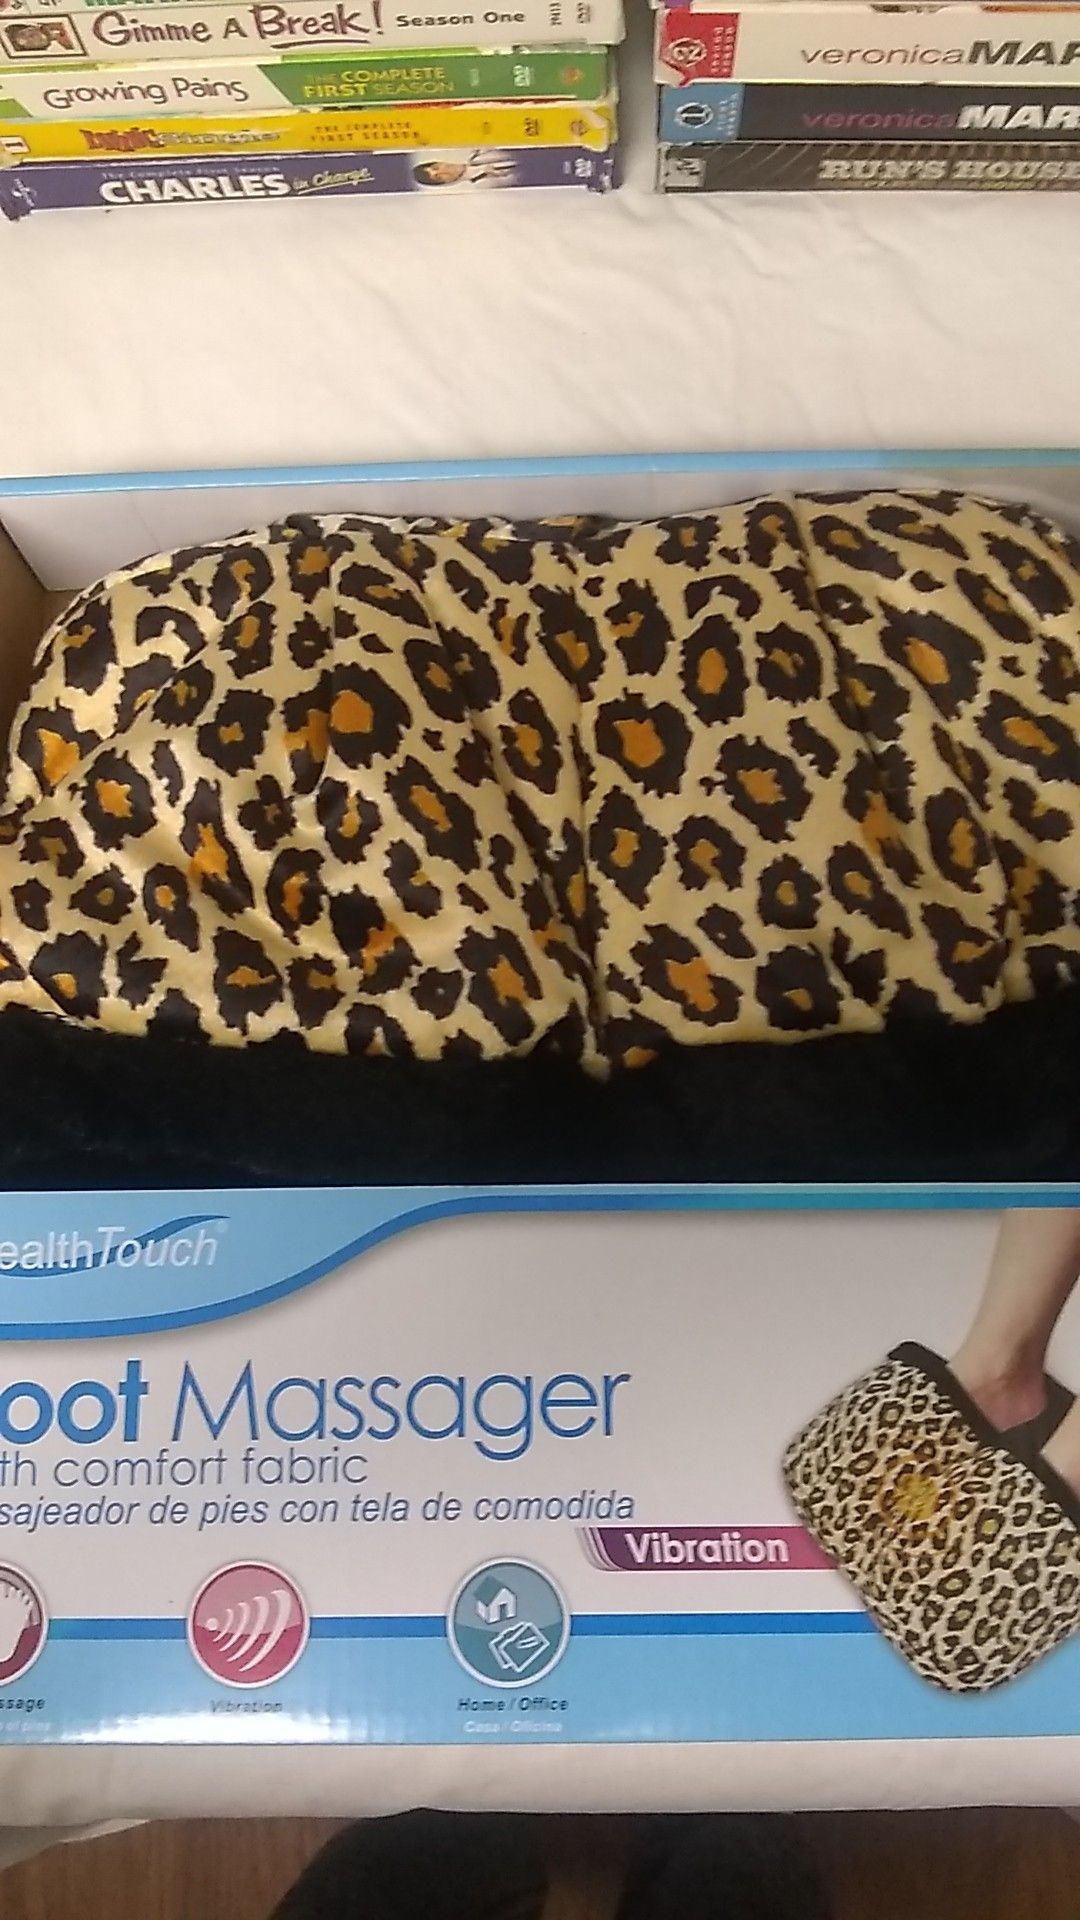 Foot Massager Health Touch